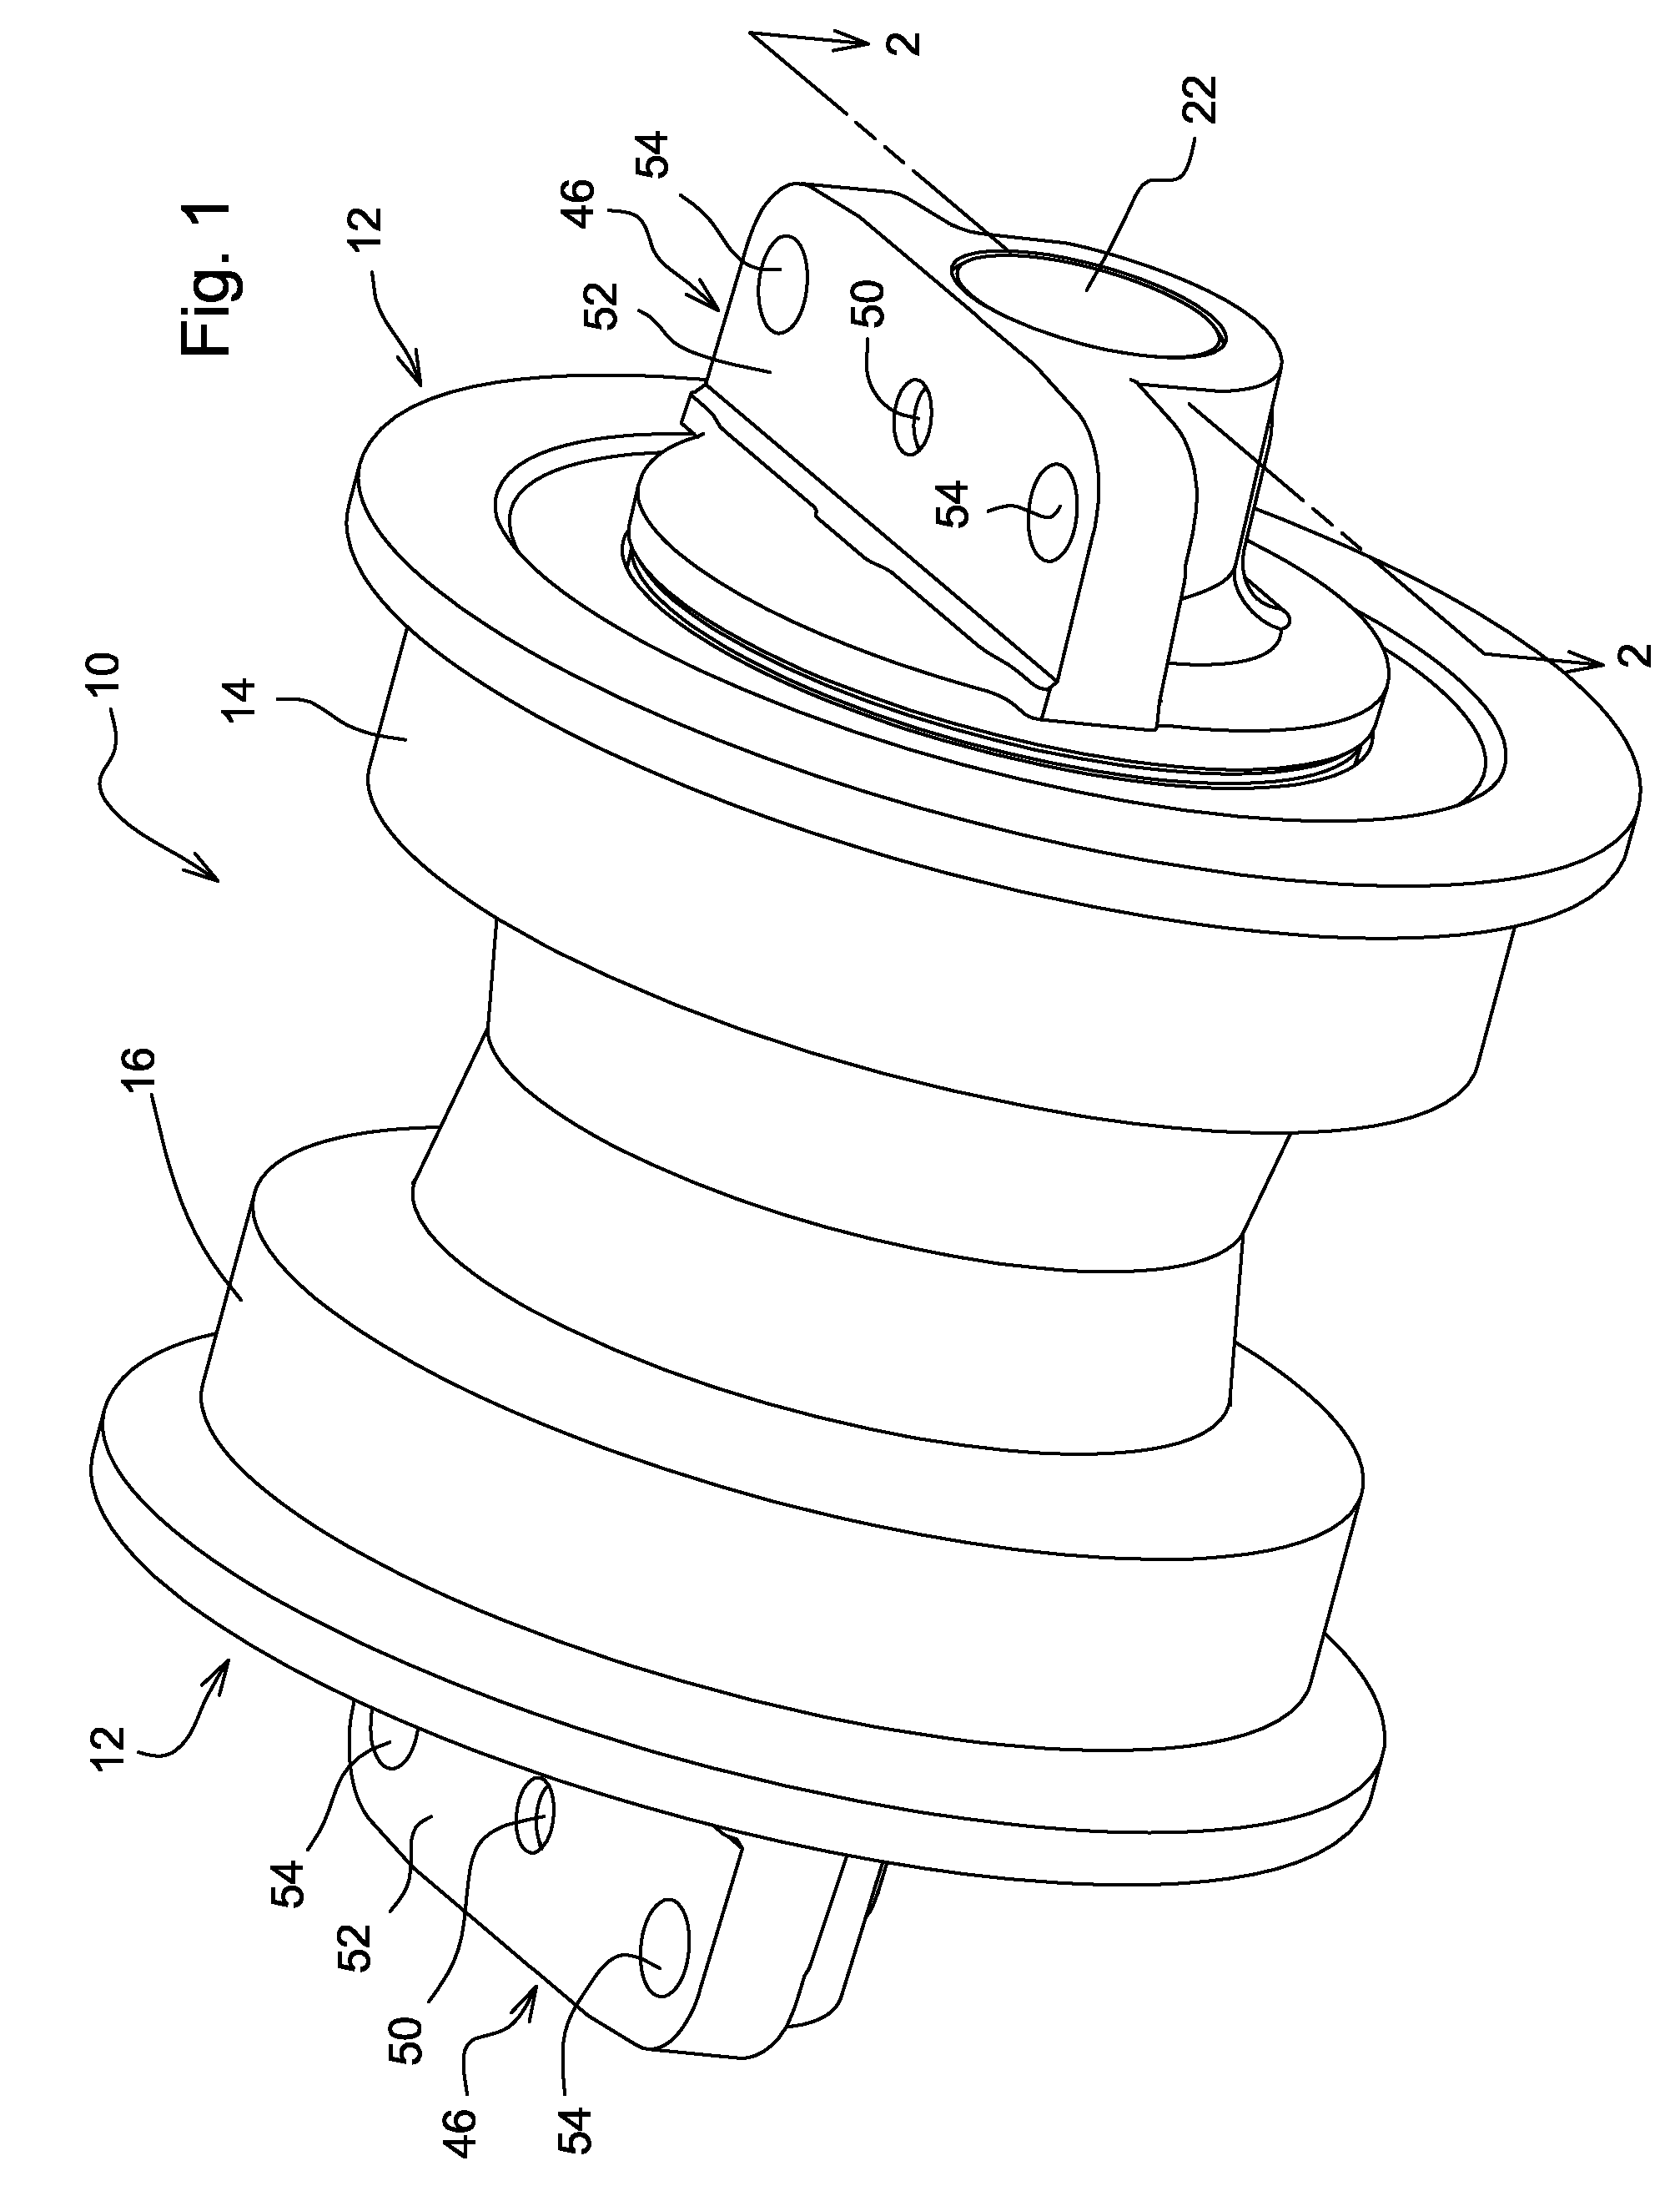 Crawler Track Roller With Internal Spherical Spacers